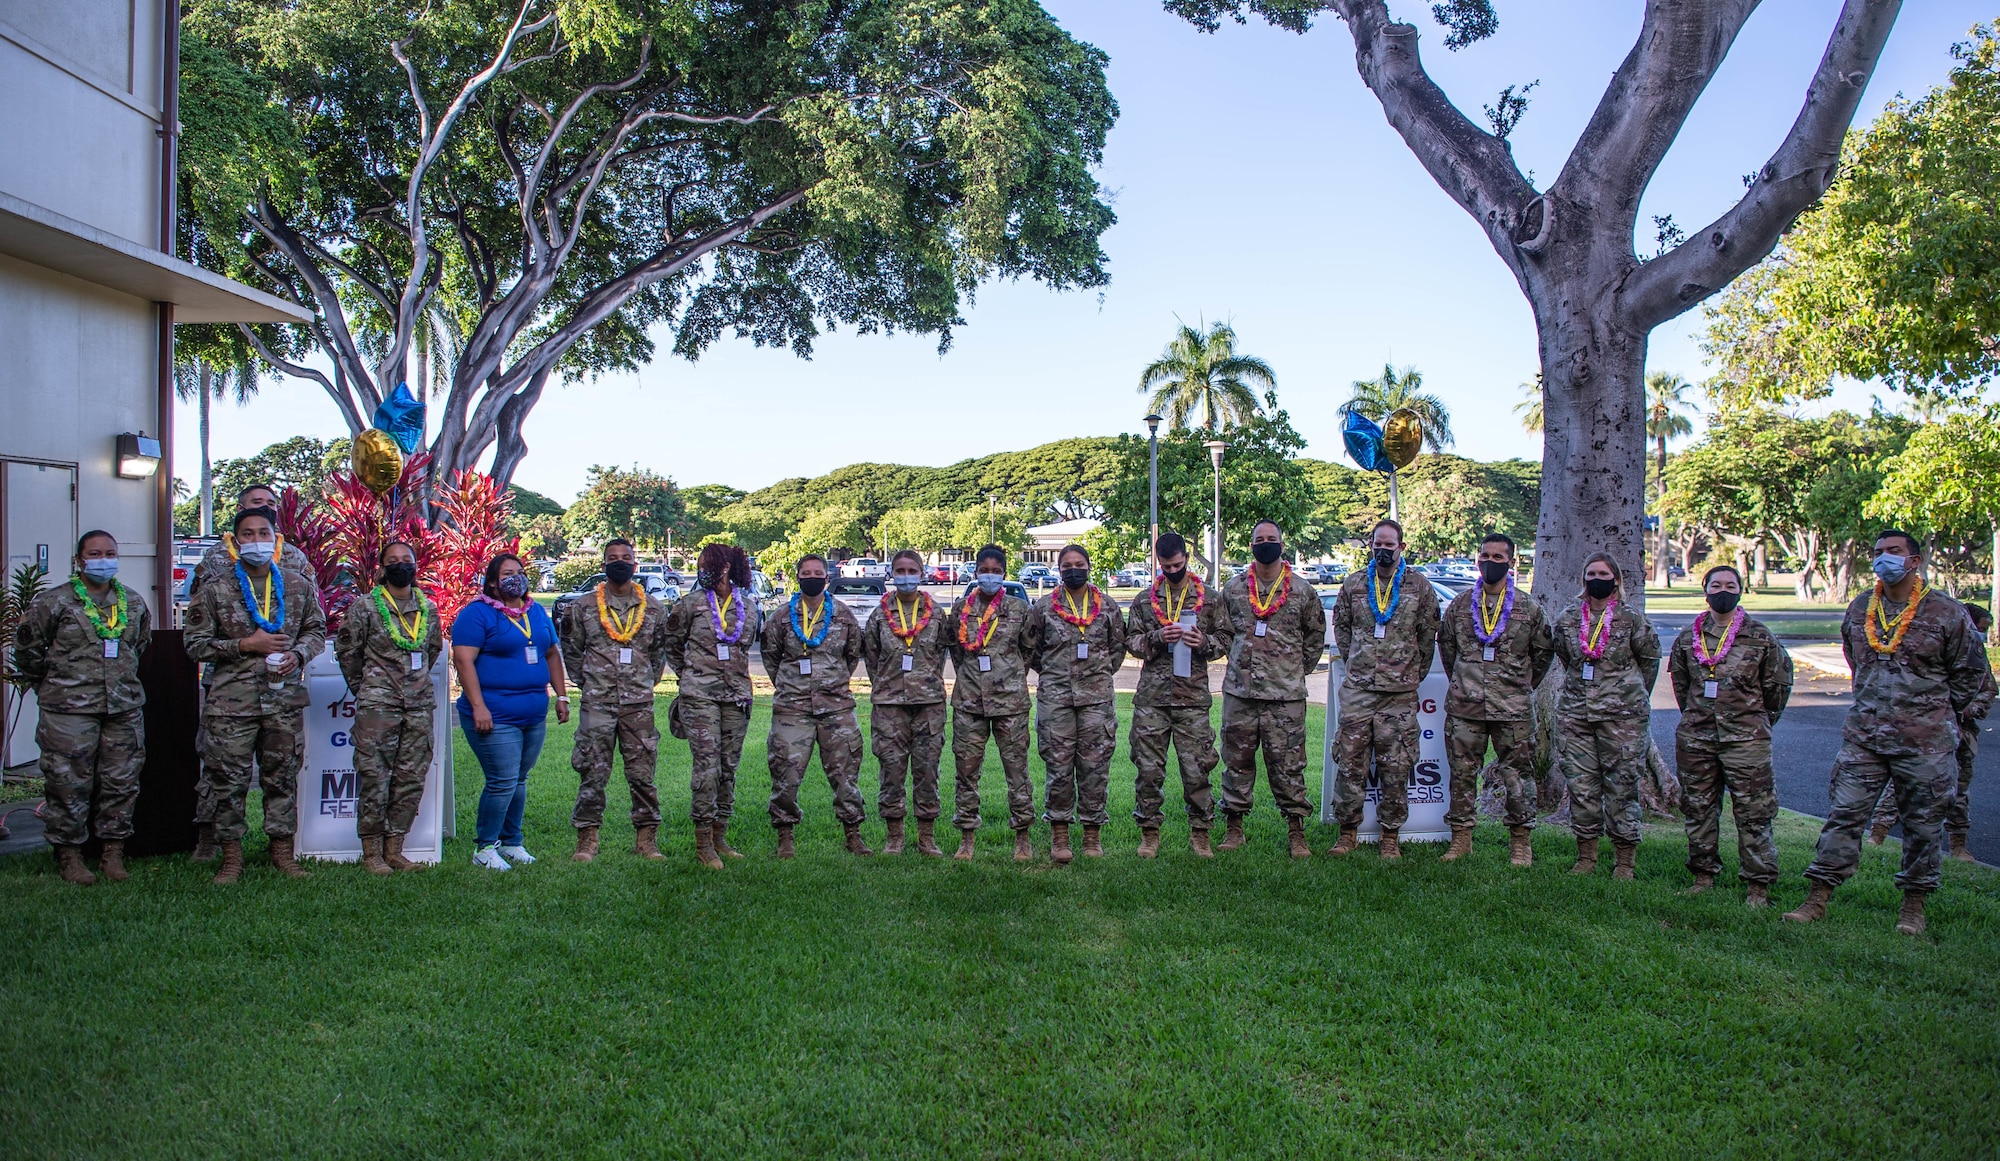 Super User volunteers from the 15th Medical Group stand together after receiving leis during the Military Health System Genesis launch ceremony at Joint Base Pearl Harbor-Hickam, Hawaii, Sept. 25, 2021. Super Users go through additional in-depth training and act as the first-line of support during the initial launch of MHS Genesis. (U.S. Air Force photo by Senior Airman Alan Ricker)